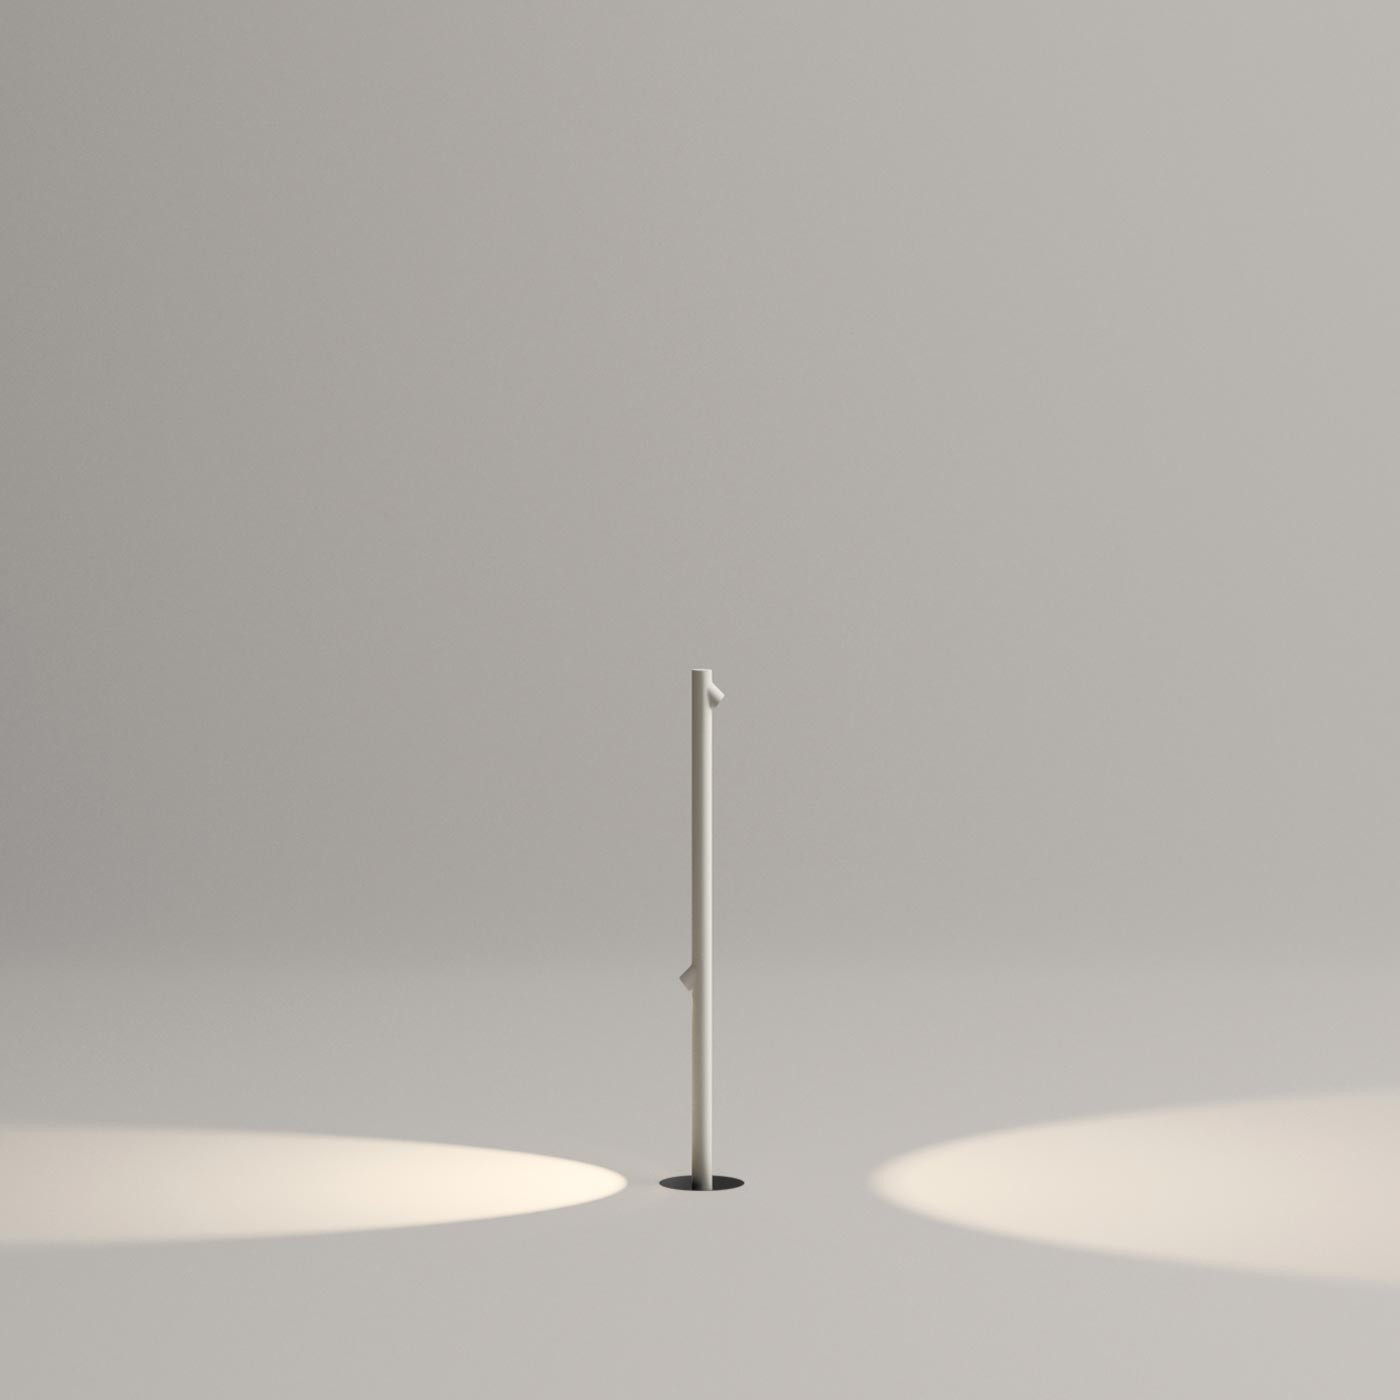 Vibia Bamboo 4801 Outdoor Spike Lamp At Nostraforma